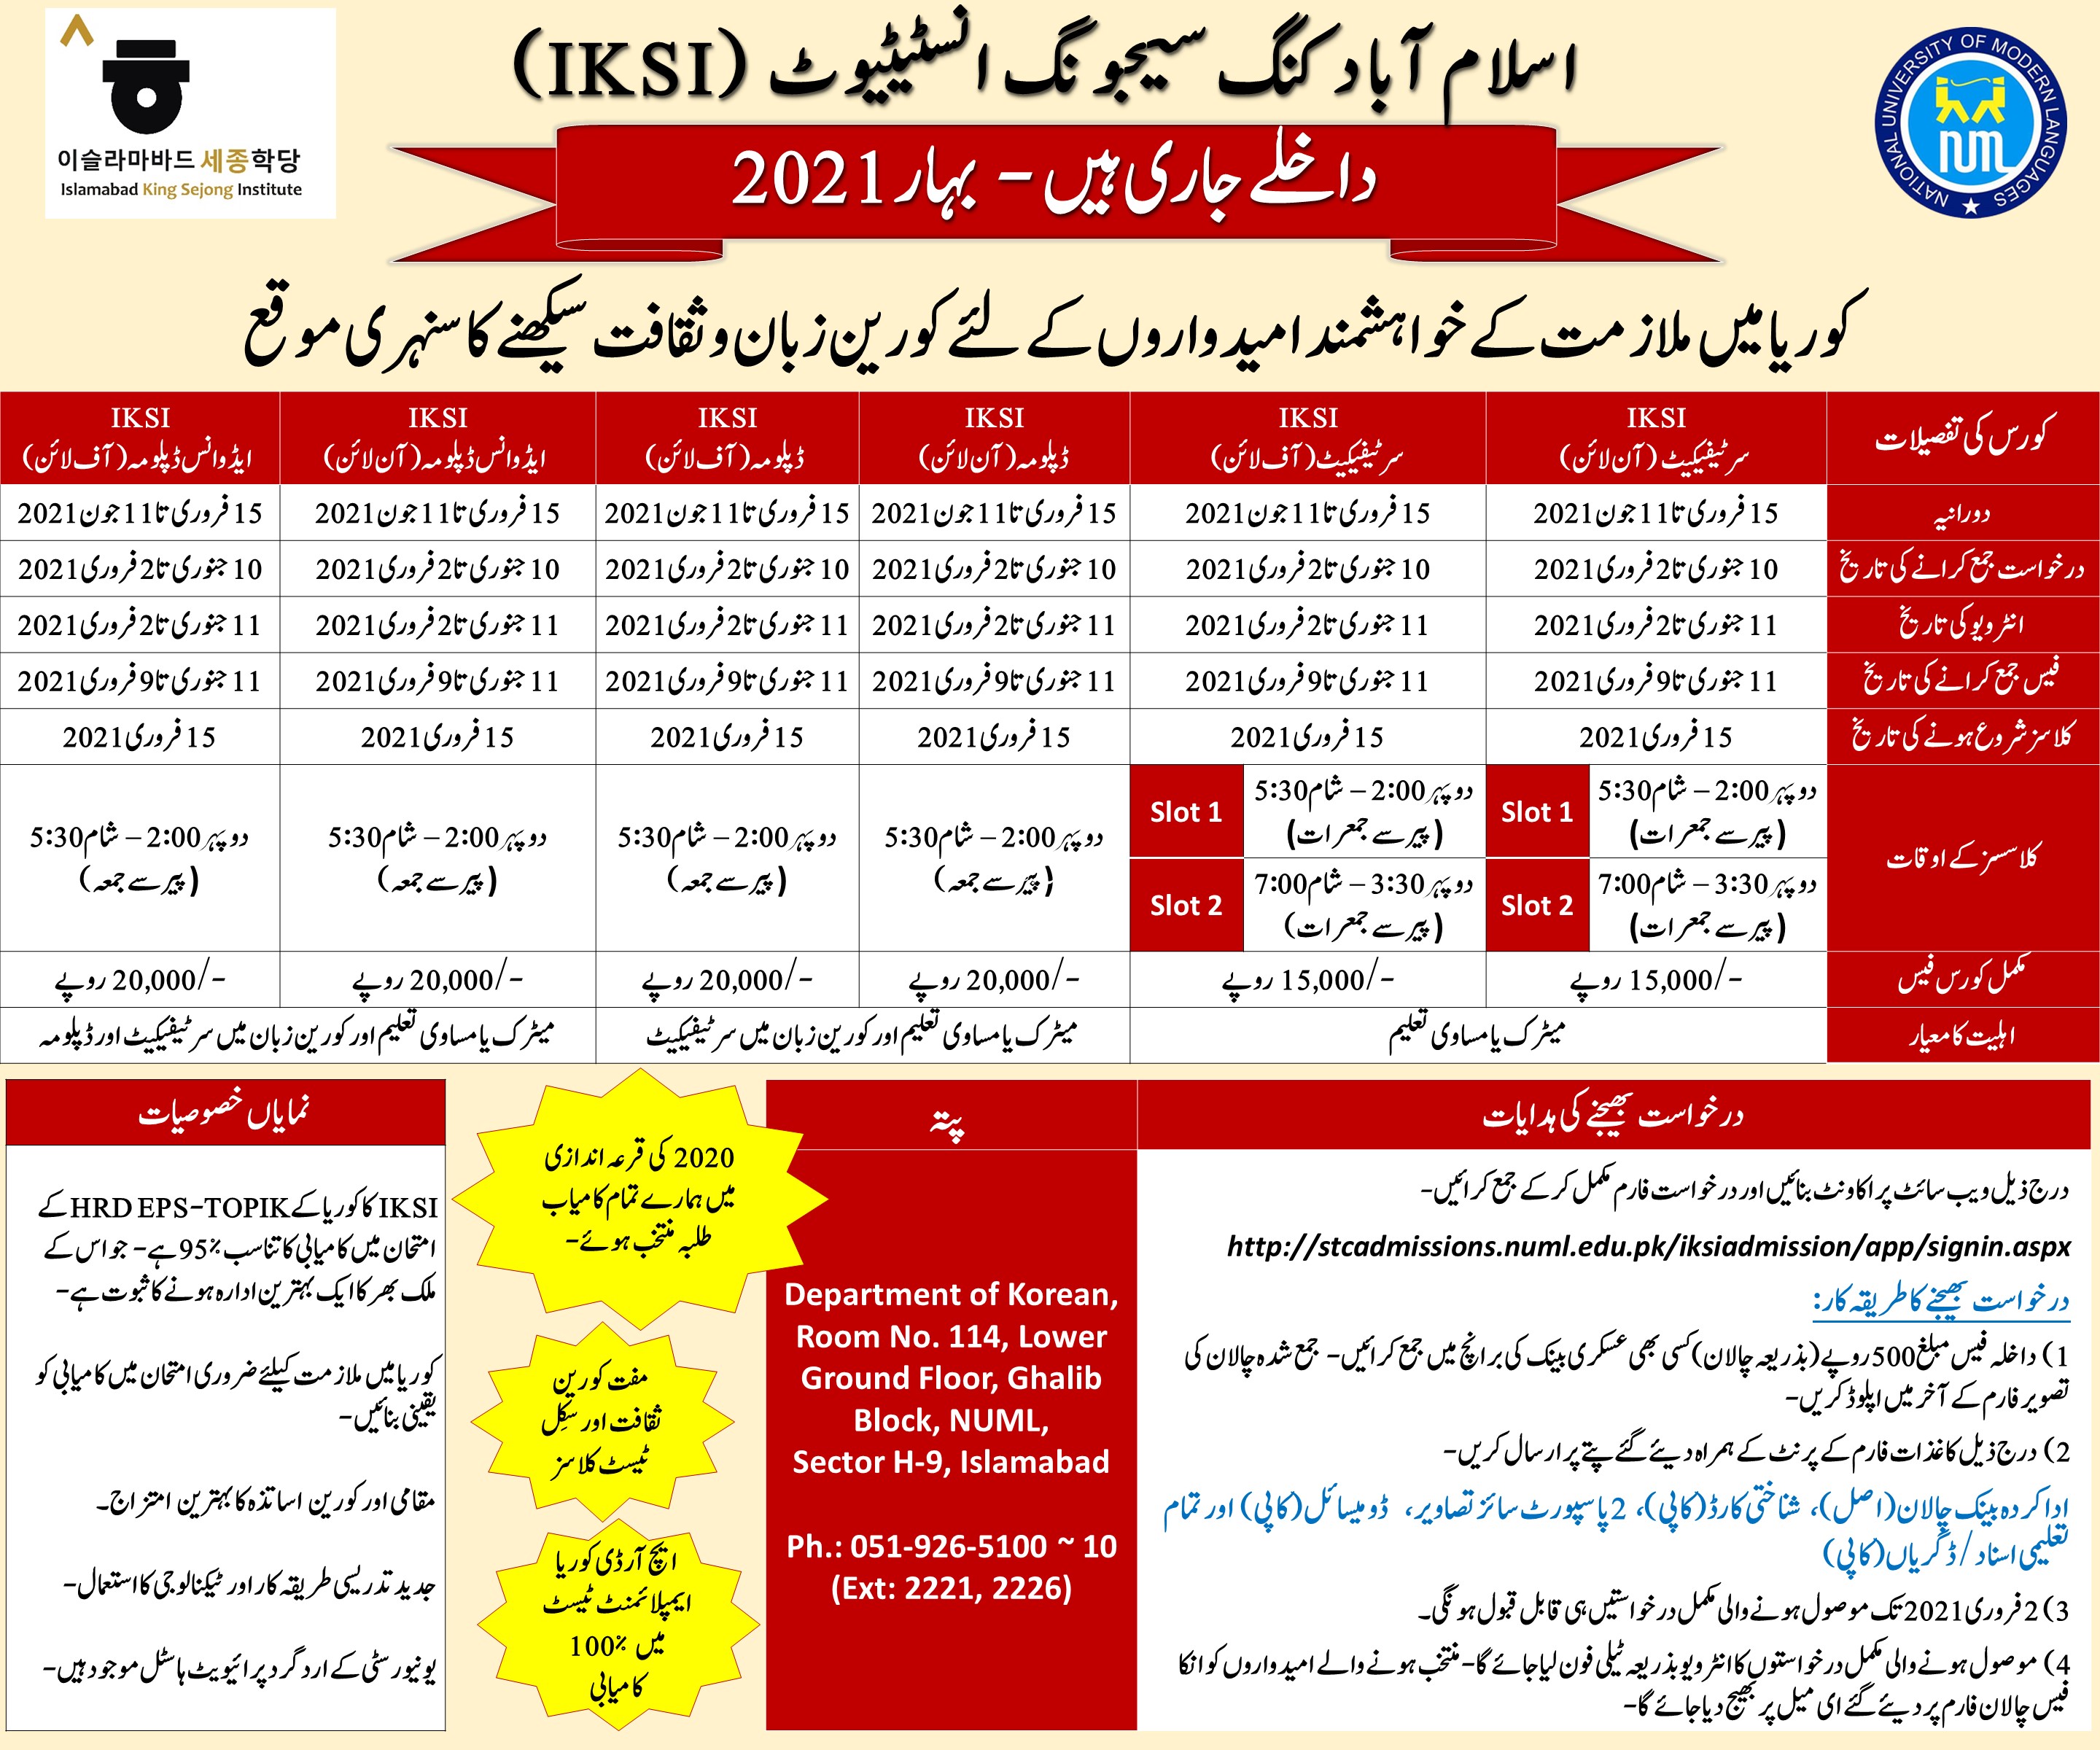 ISLAMABAD KING SEJONG INSTITUTE - SPRING 2021 ADMISSION OPEN